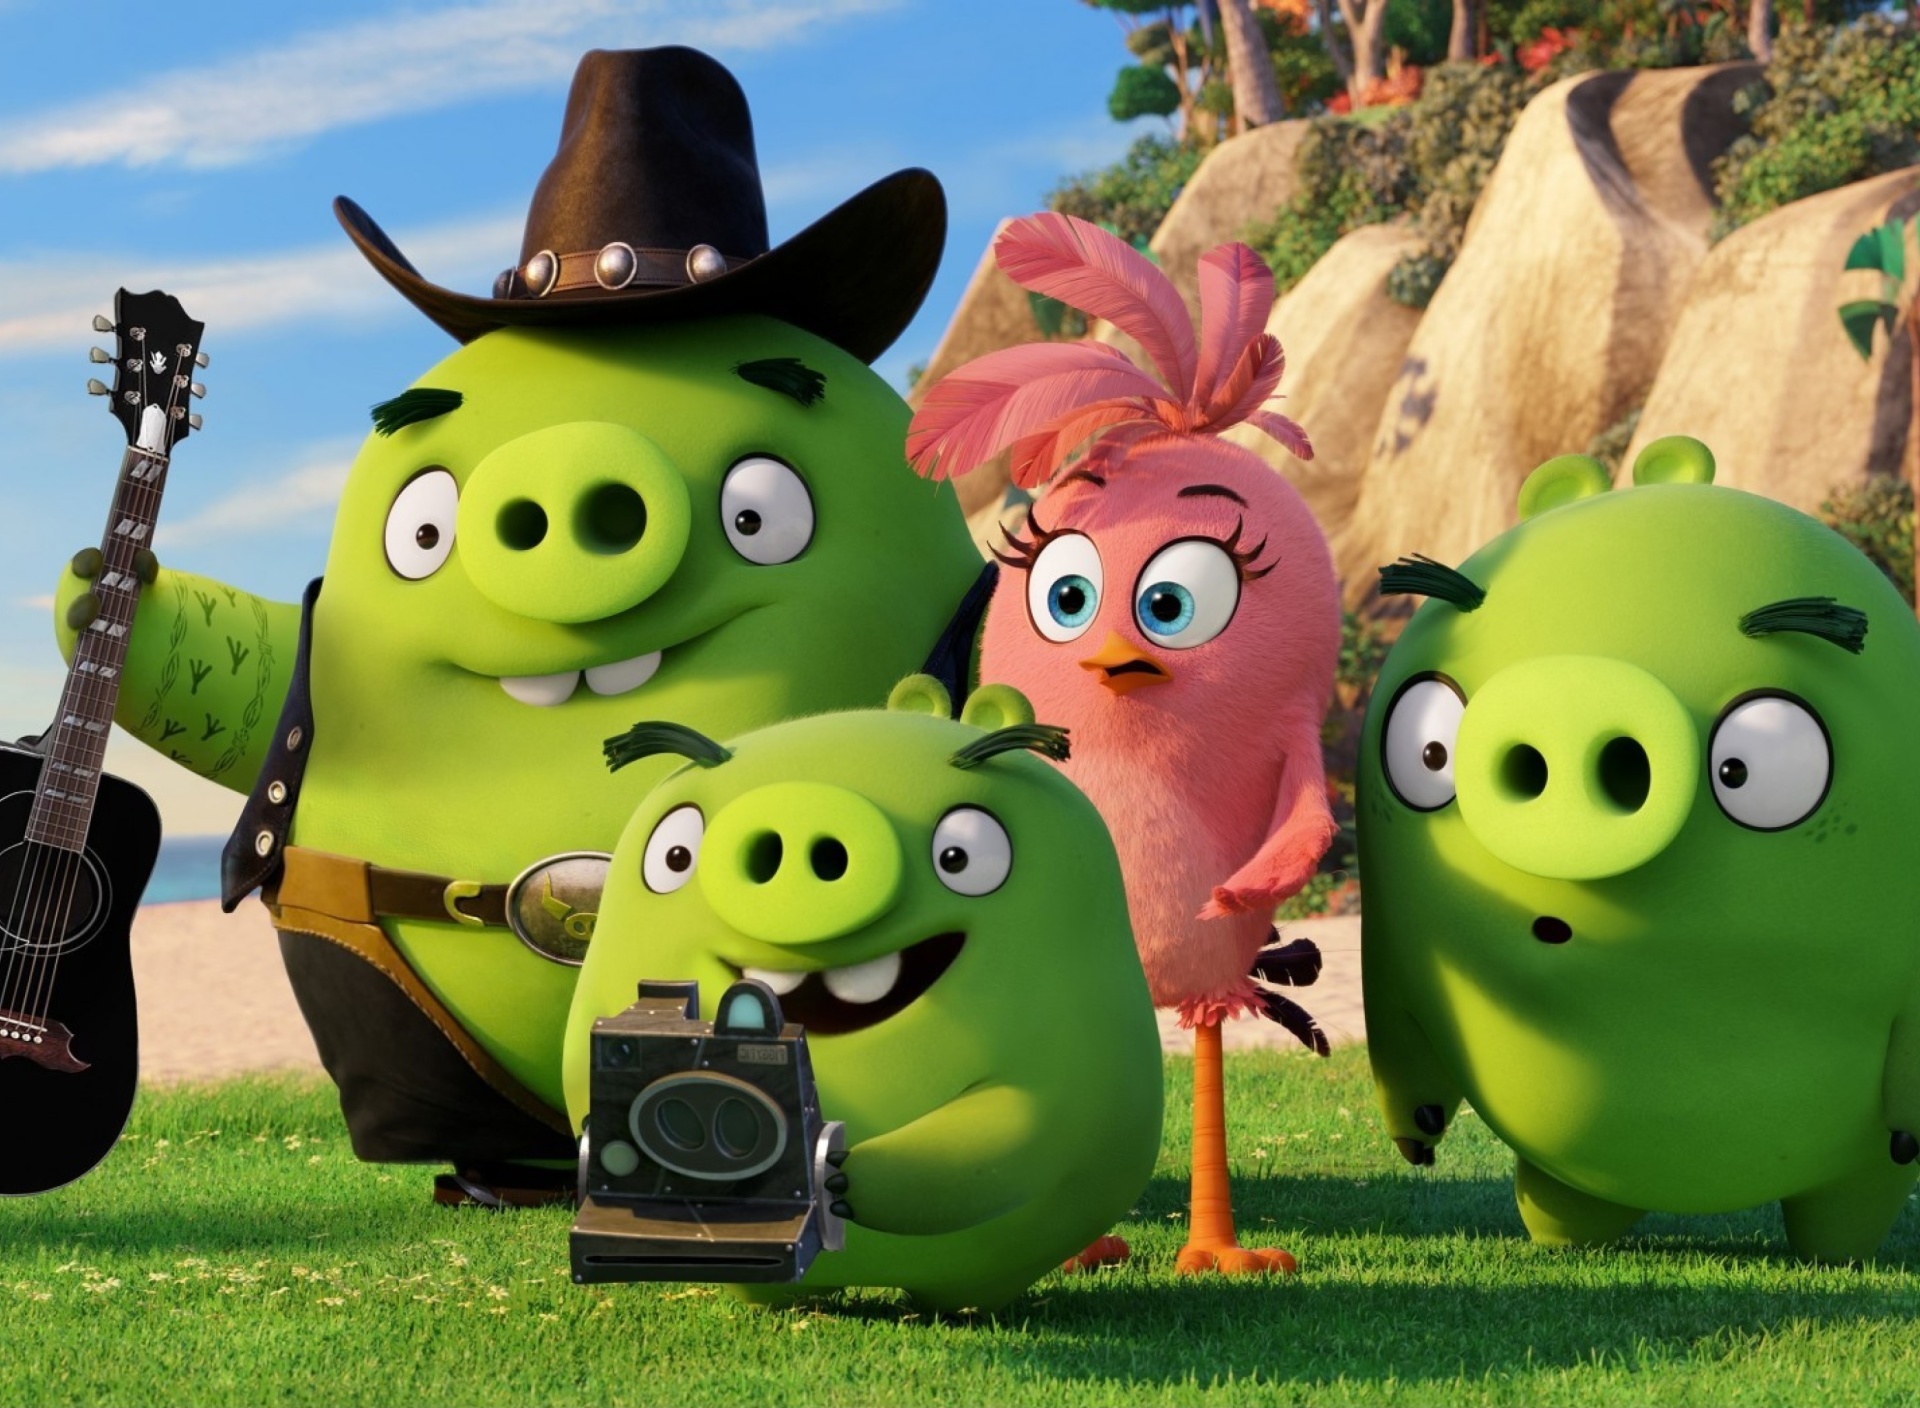 The Angry Birds Movie Pigs screenshot #1 1920x1408